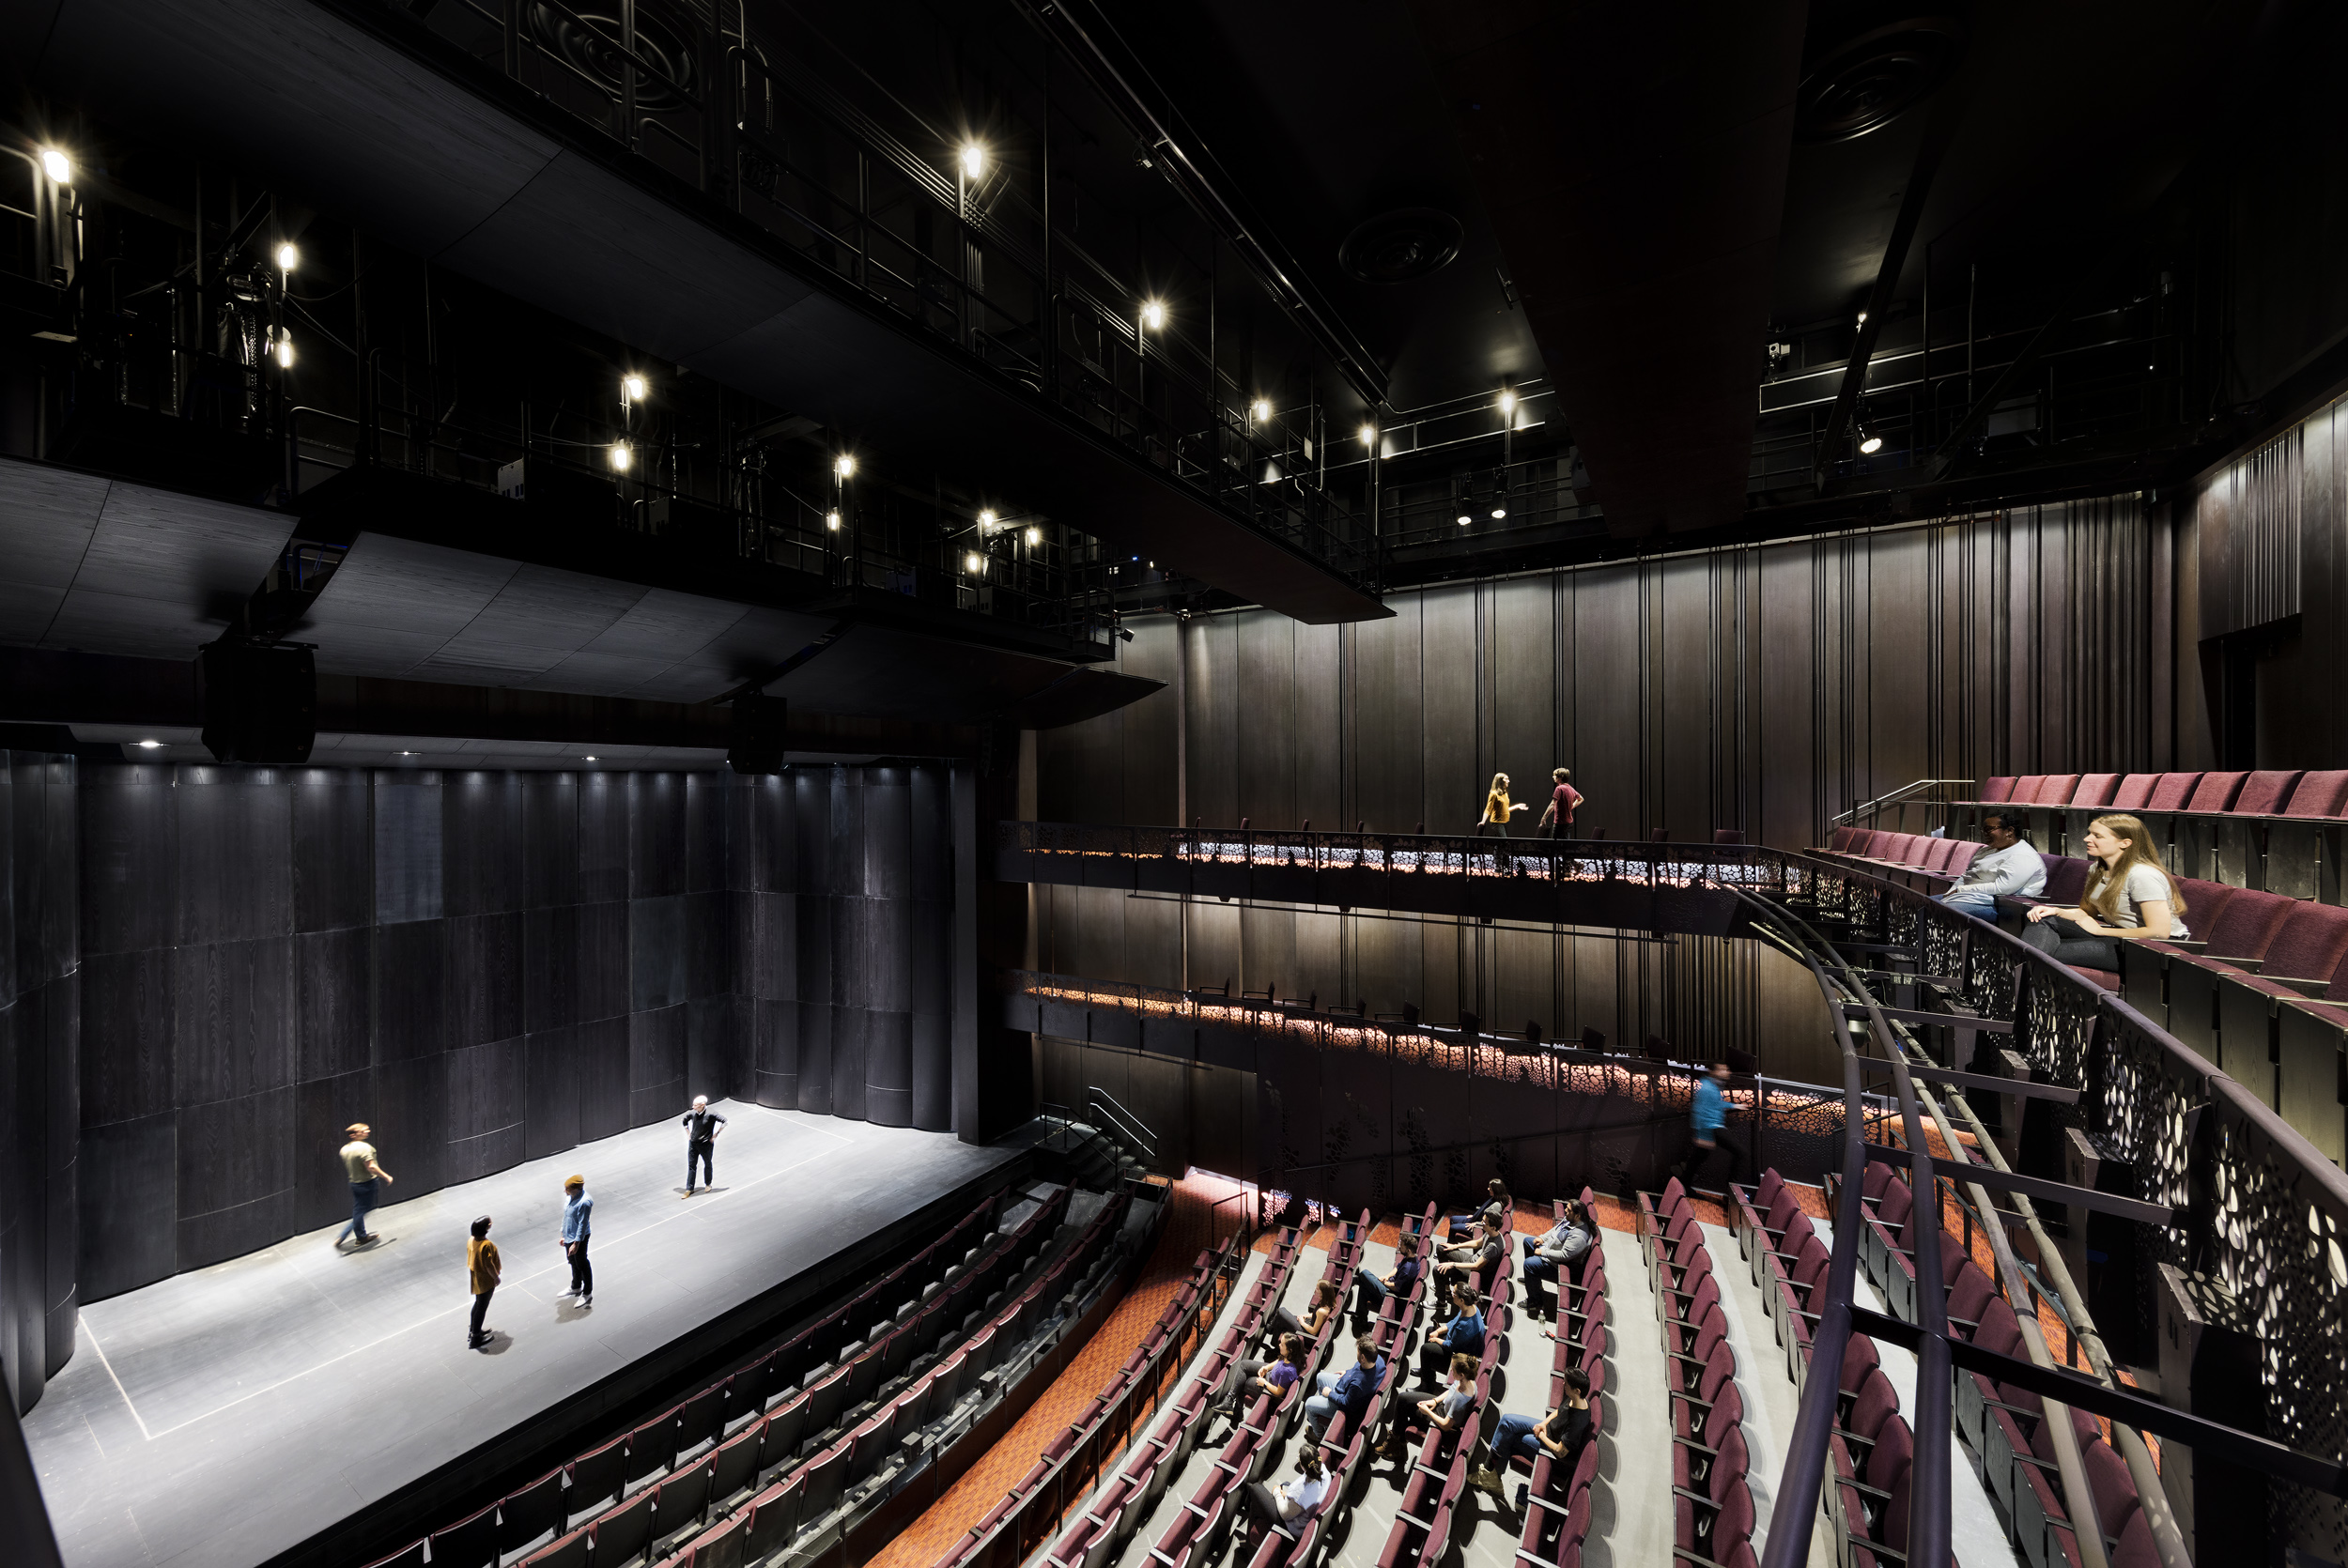 <p>The 350-seat theater is NYU's first professional-level proscenium, fly-loft theatre for student productions. <small>&copy; Connie Zhou / JBSA Images</small></p>